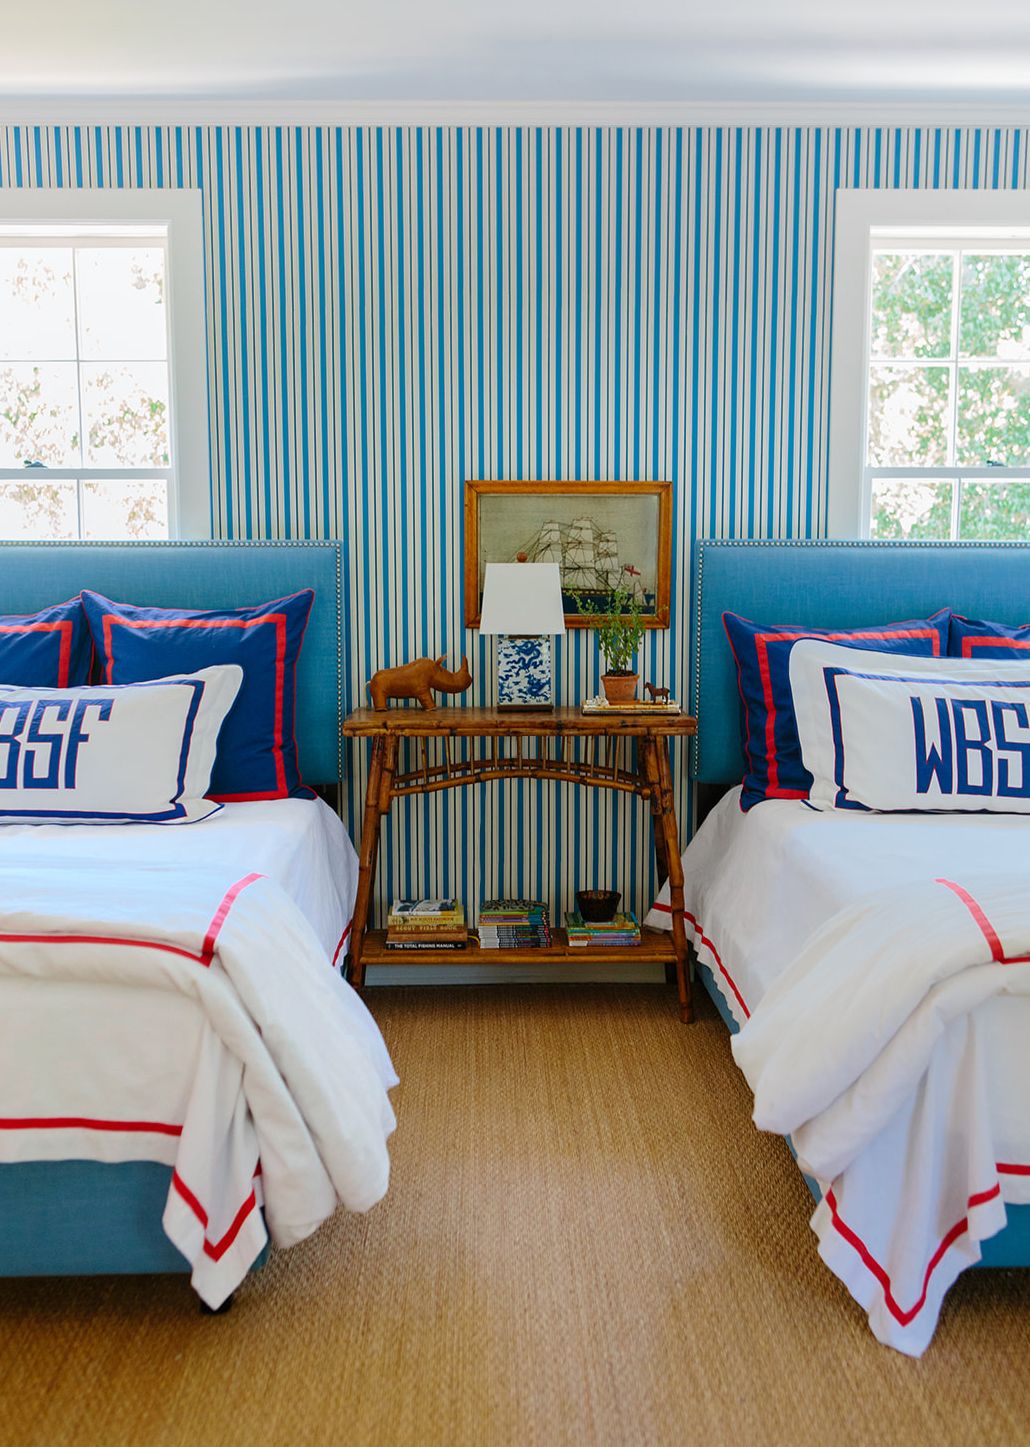 31 sophisticated boys' room ideas - how to decorate a boys' bedroom